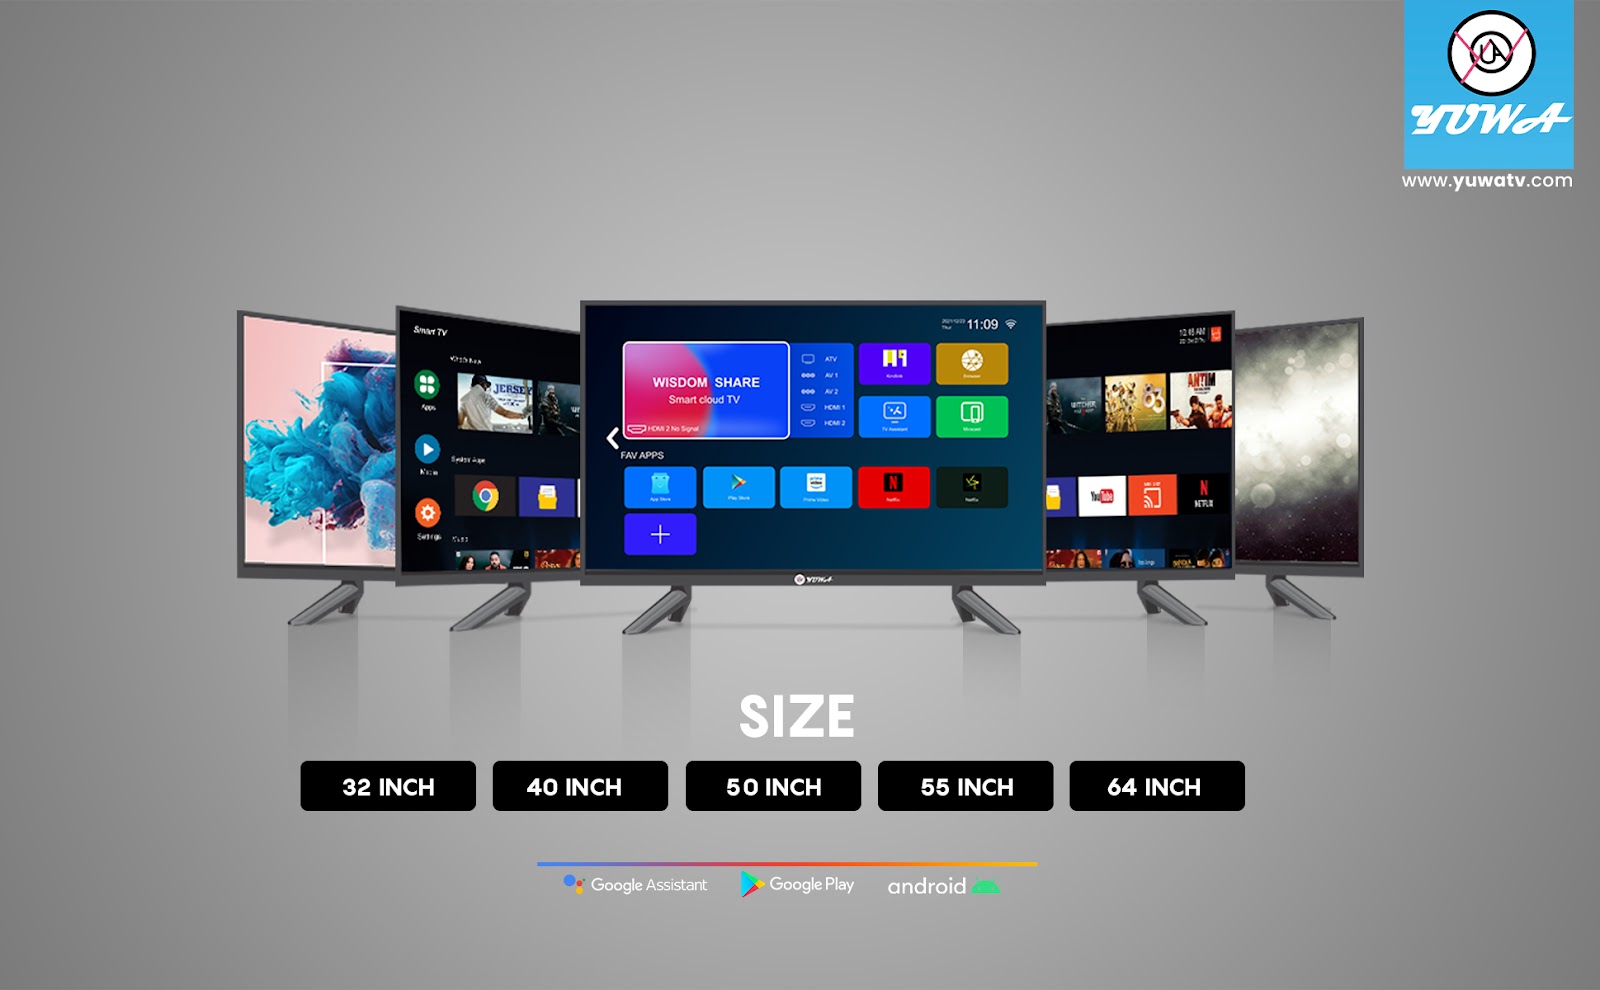 LED TV Manufacturers
LED TV Companies in India
Best Smart TV in Noida
Best Smart LED TV in Noida
Android Television Manufacturers in noida
Smart LED TV Manufacturers in Delhi NCR
Smart LED TV Manufacturers in India